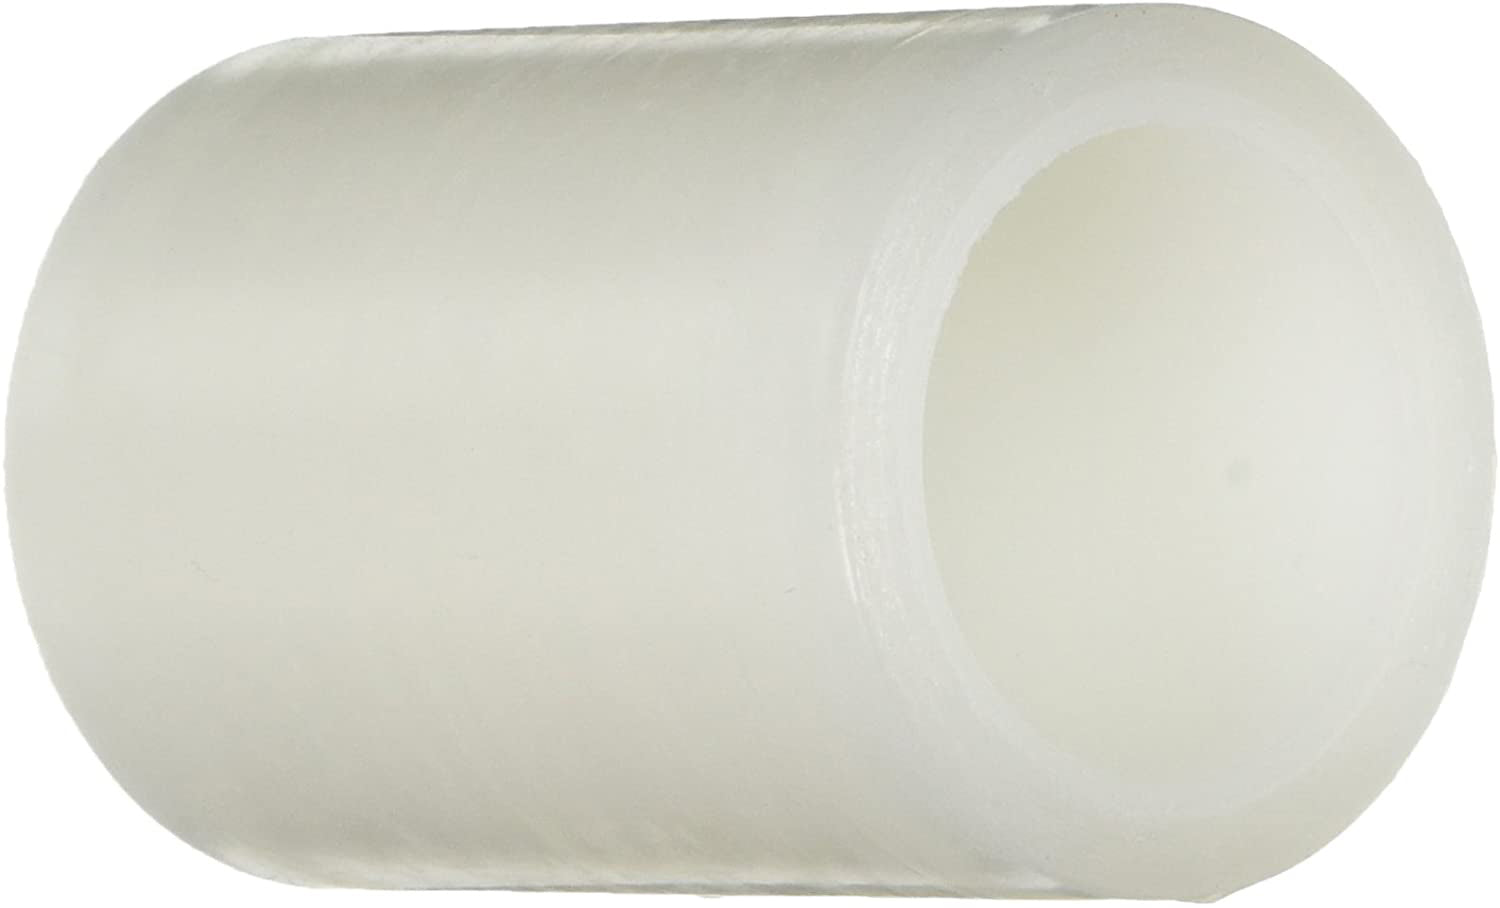 LIFESAFE RE3848 RV Awning Repair Tape - Clear, 3" x 15'